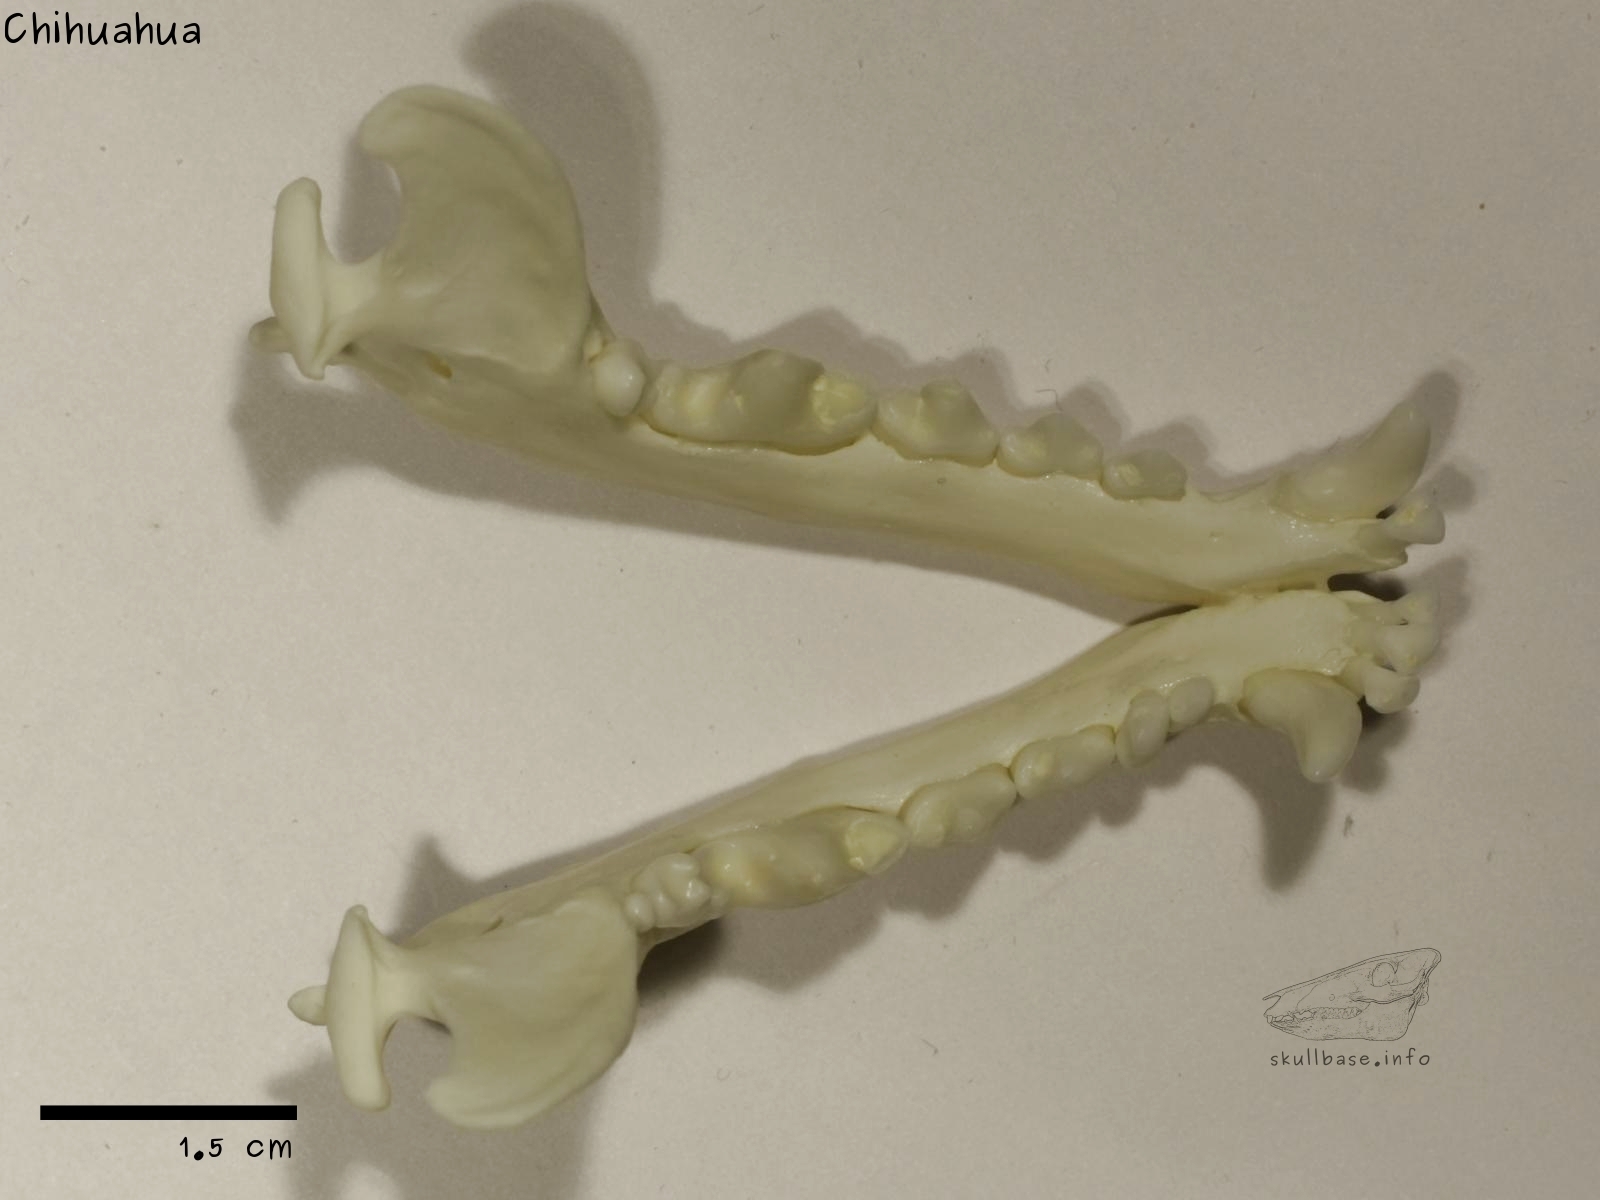 Chihuahua (Canis lupus familiaris) jaw